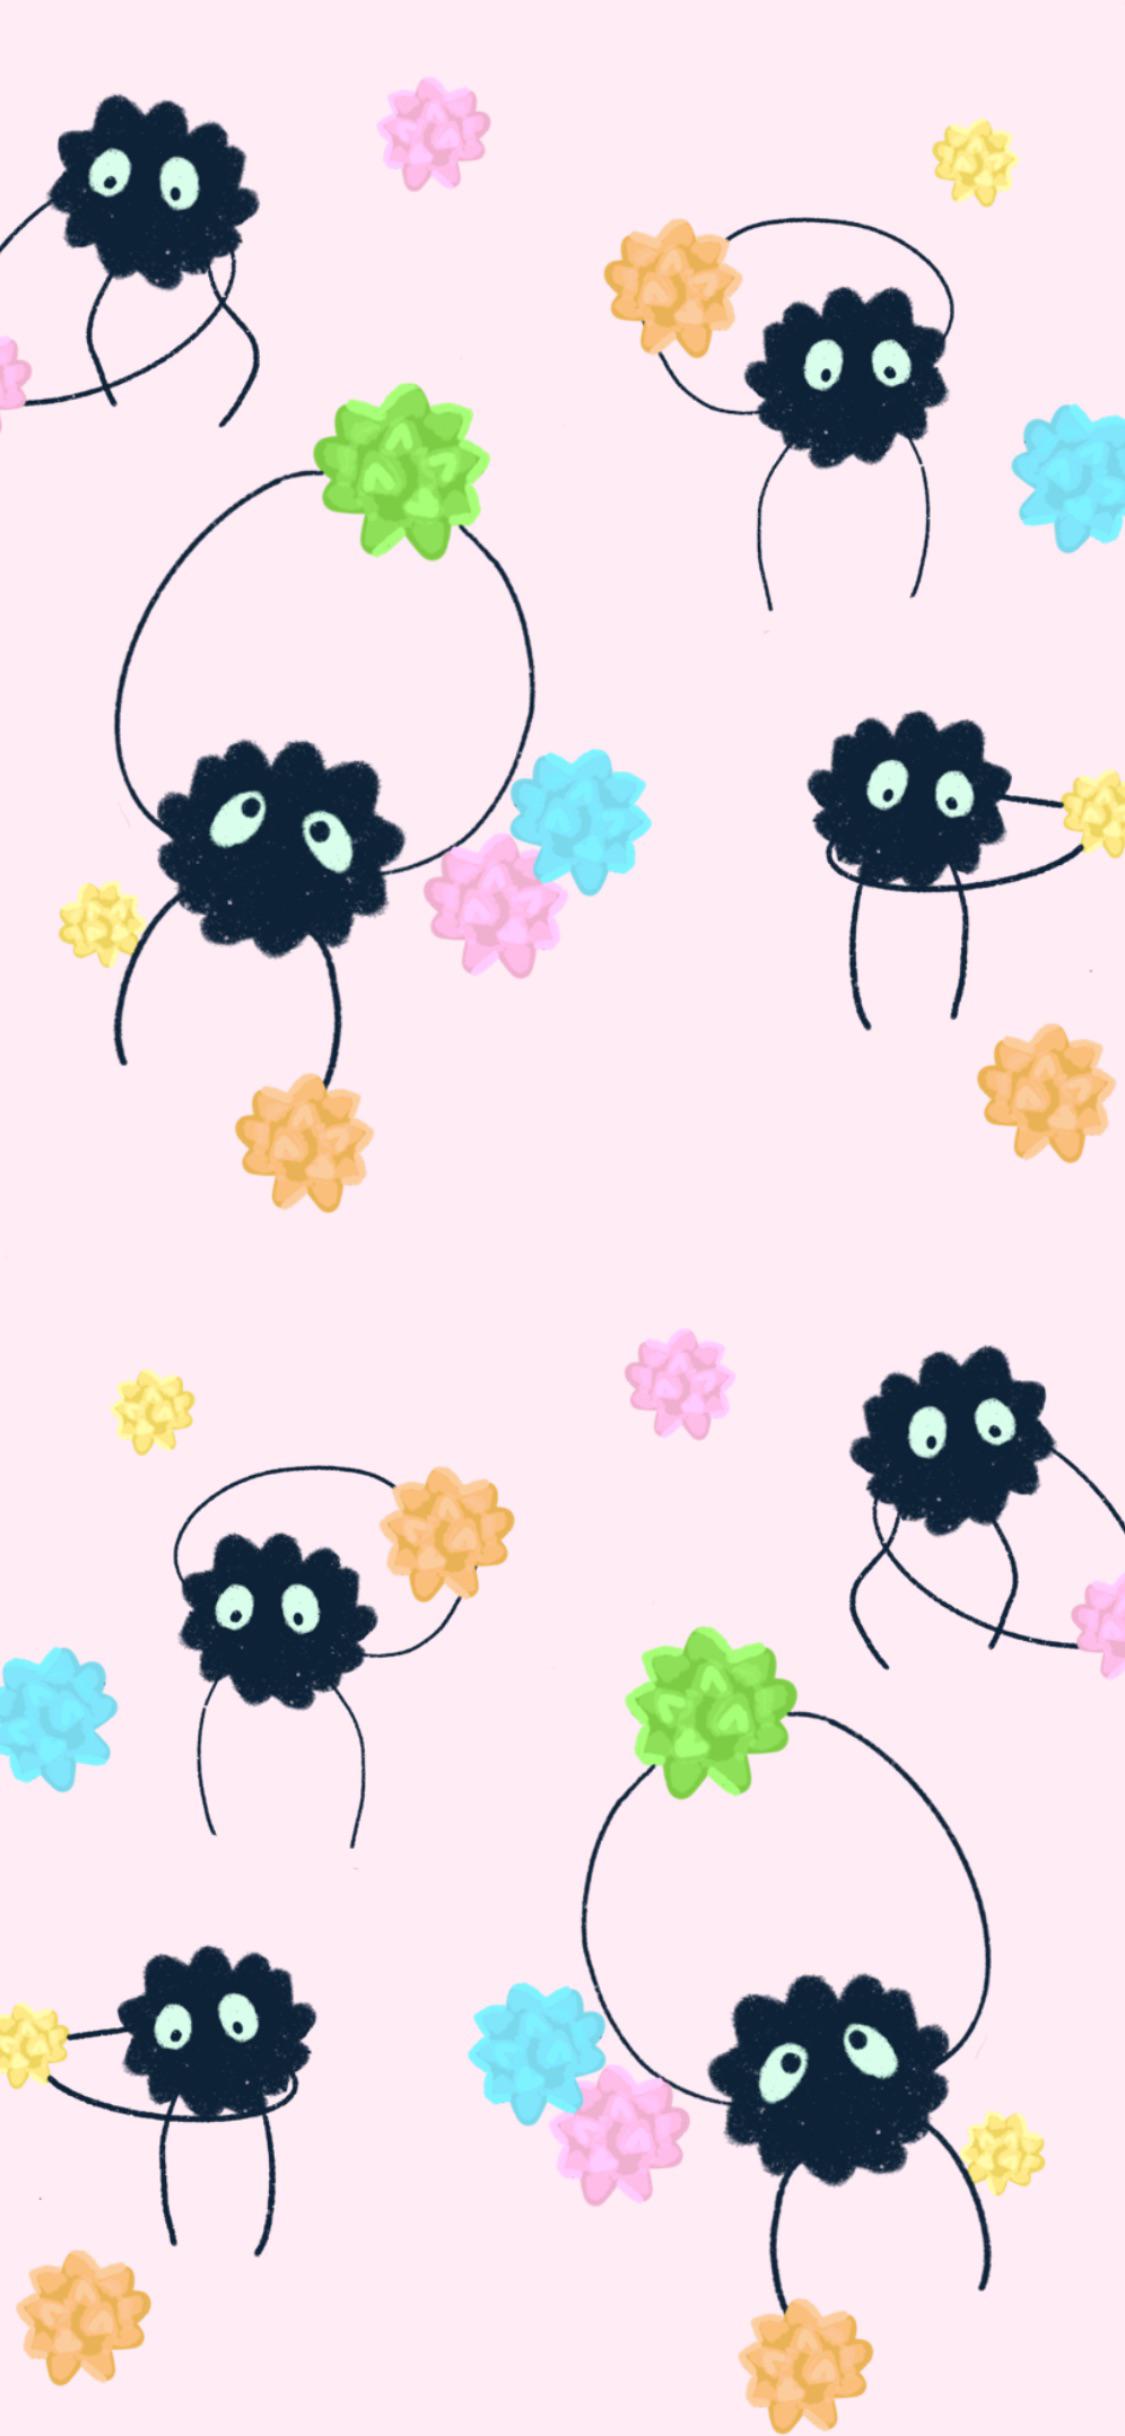 I made a free soot sprite wallpaper if anyone wants :) I added a link for high res free download